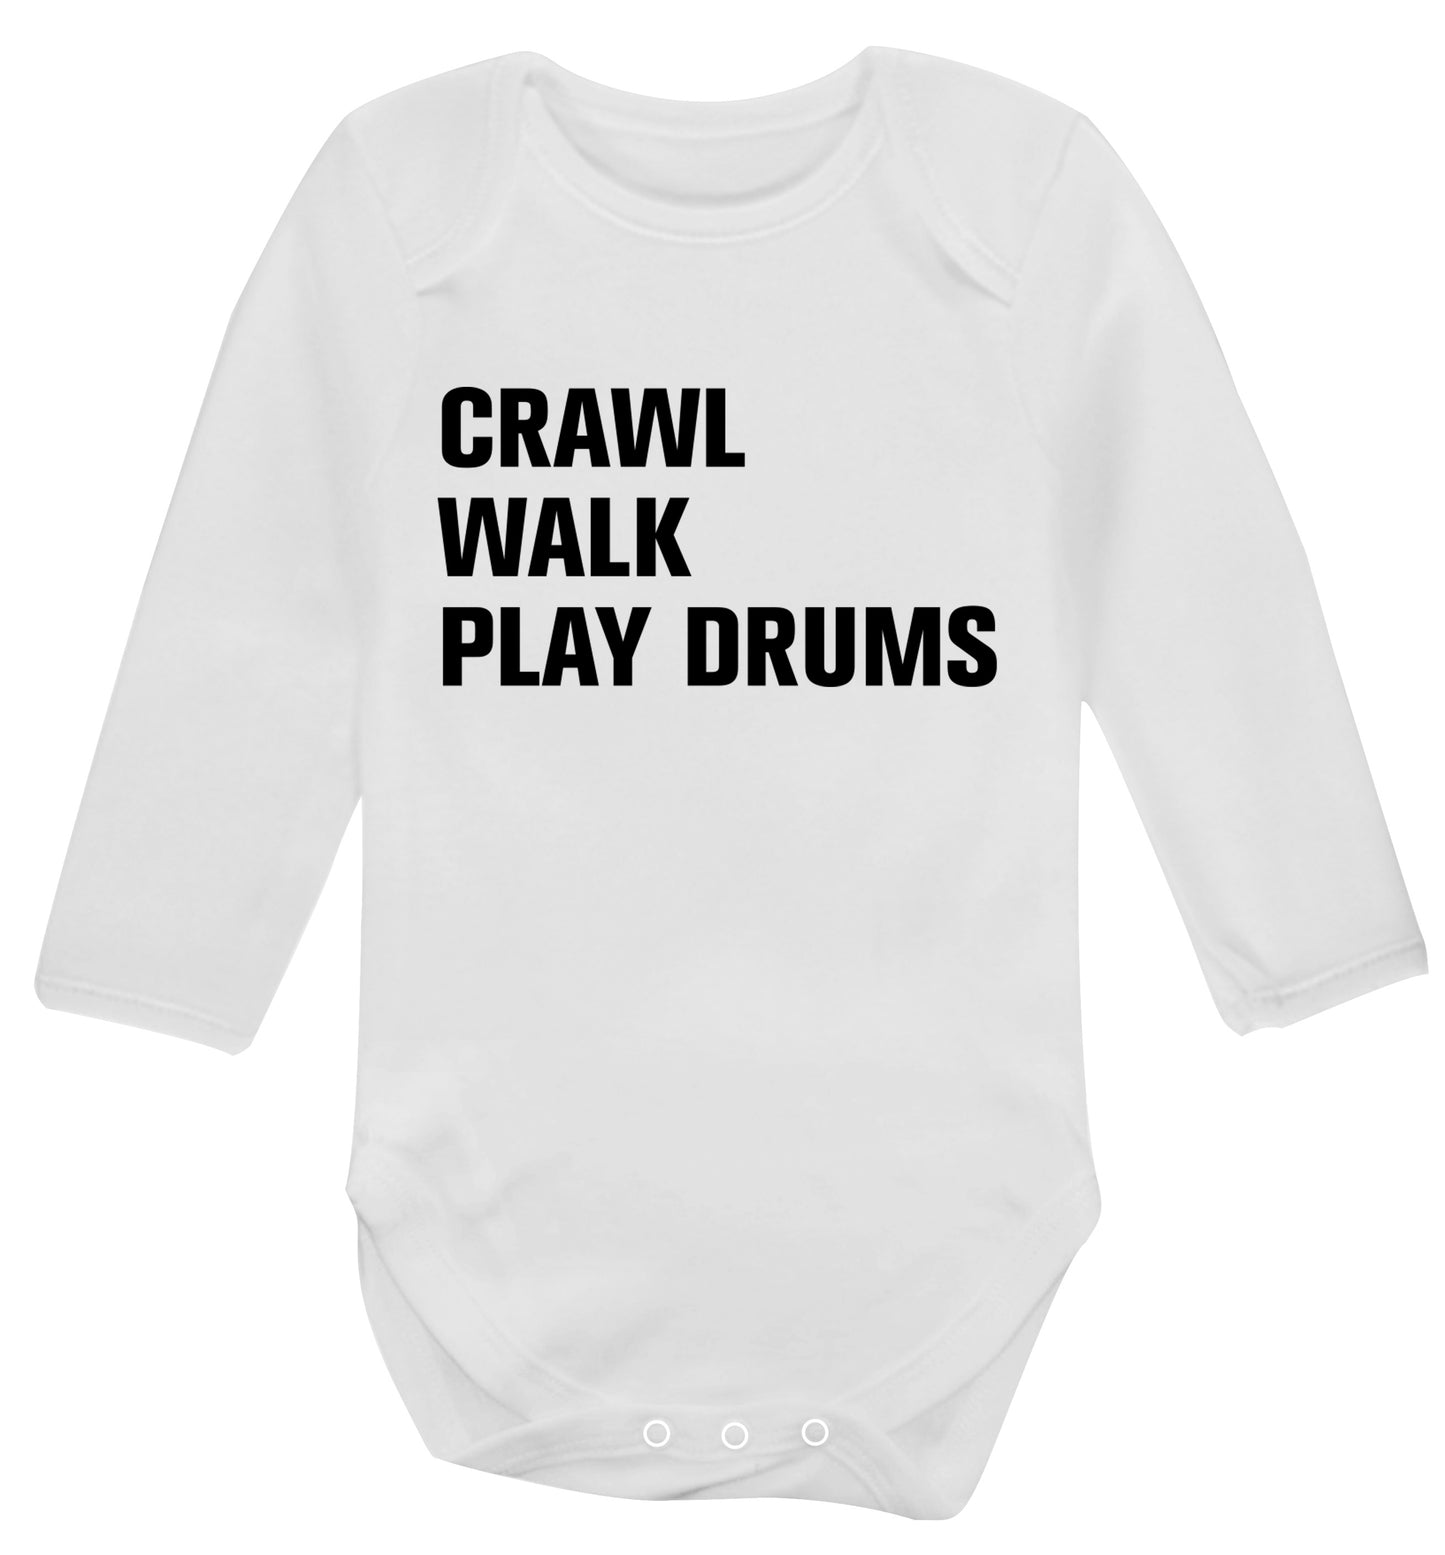 Crawl walk play drums Baby Vest long sleeved white 6-12 months